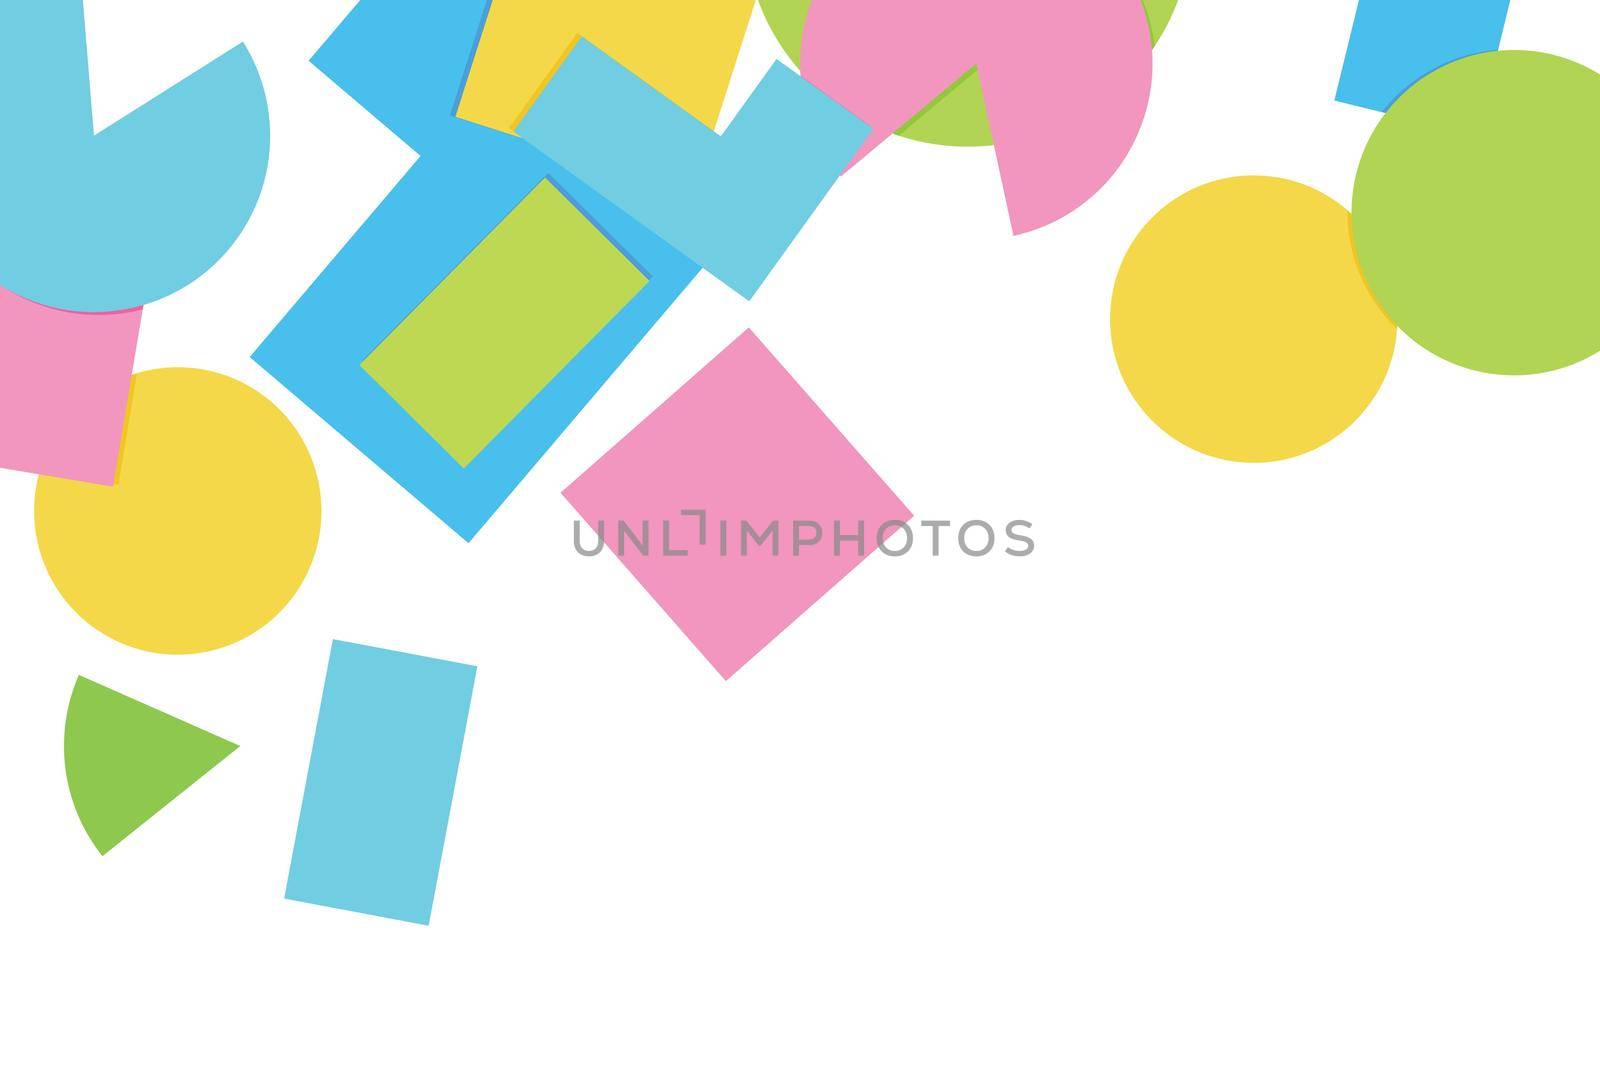 Futuristic cover design for notebook paper, copybook brochures, book, magazine, print. Geometric abstract background with multicolor elements. Colored pattern with shapes.